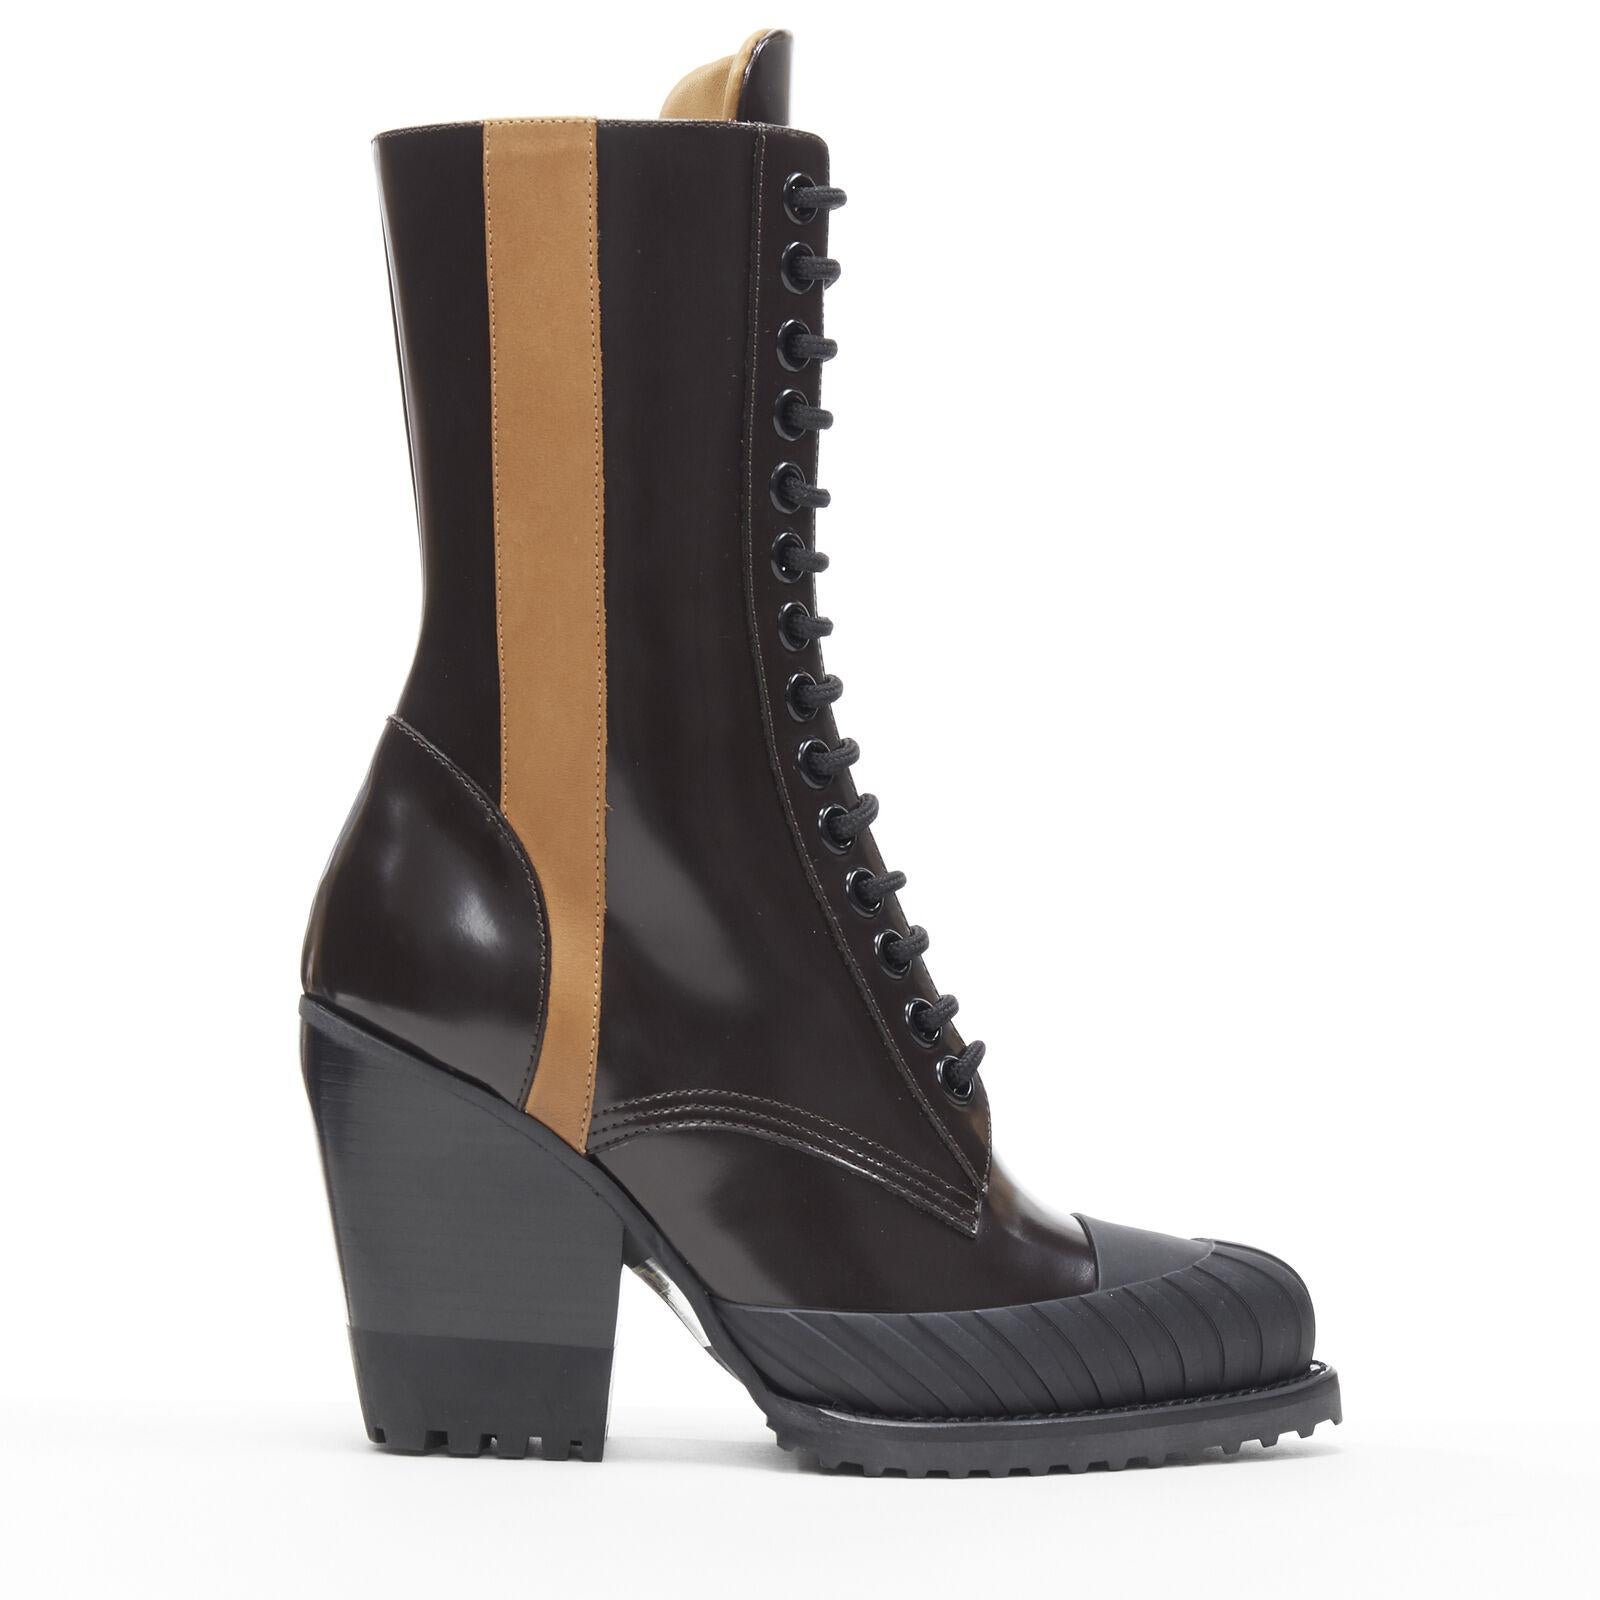 new CHLOE Runway Rylee brown glossy leather block heel heel rubber toe boot EU37
Reference: TGAS/A05609
Brand: Chloe
Model: Rylee
Collection: Runway
Material: Leather
Color: Brown
Pattern: Solid
Closure: Lace Up
Extra Details: Signature Runway Rylee